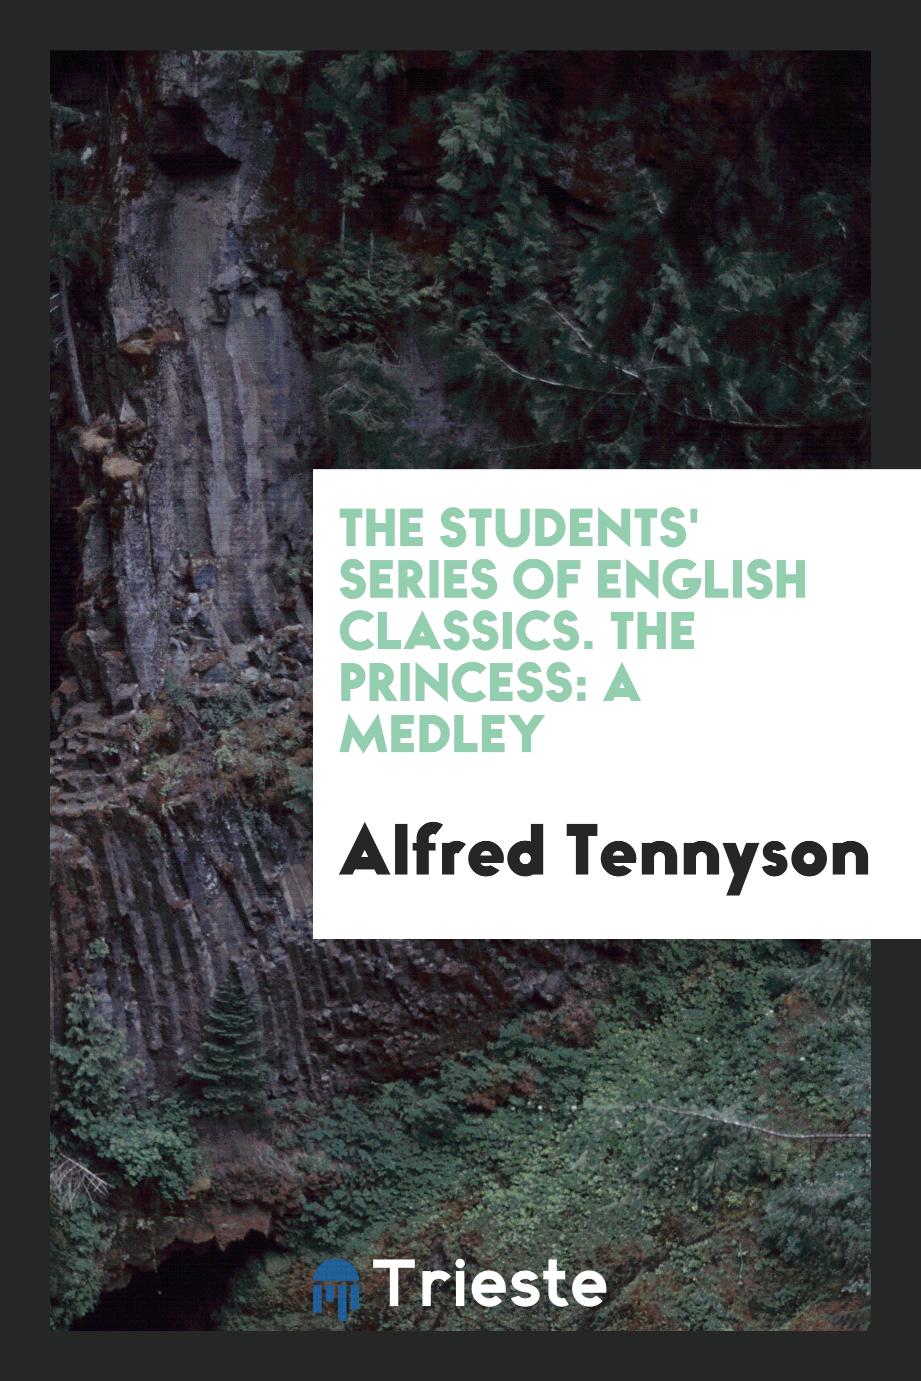 The Students' Series of English Classics. The Princess: A Medley